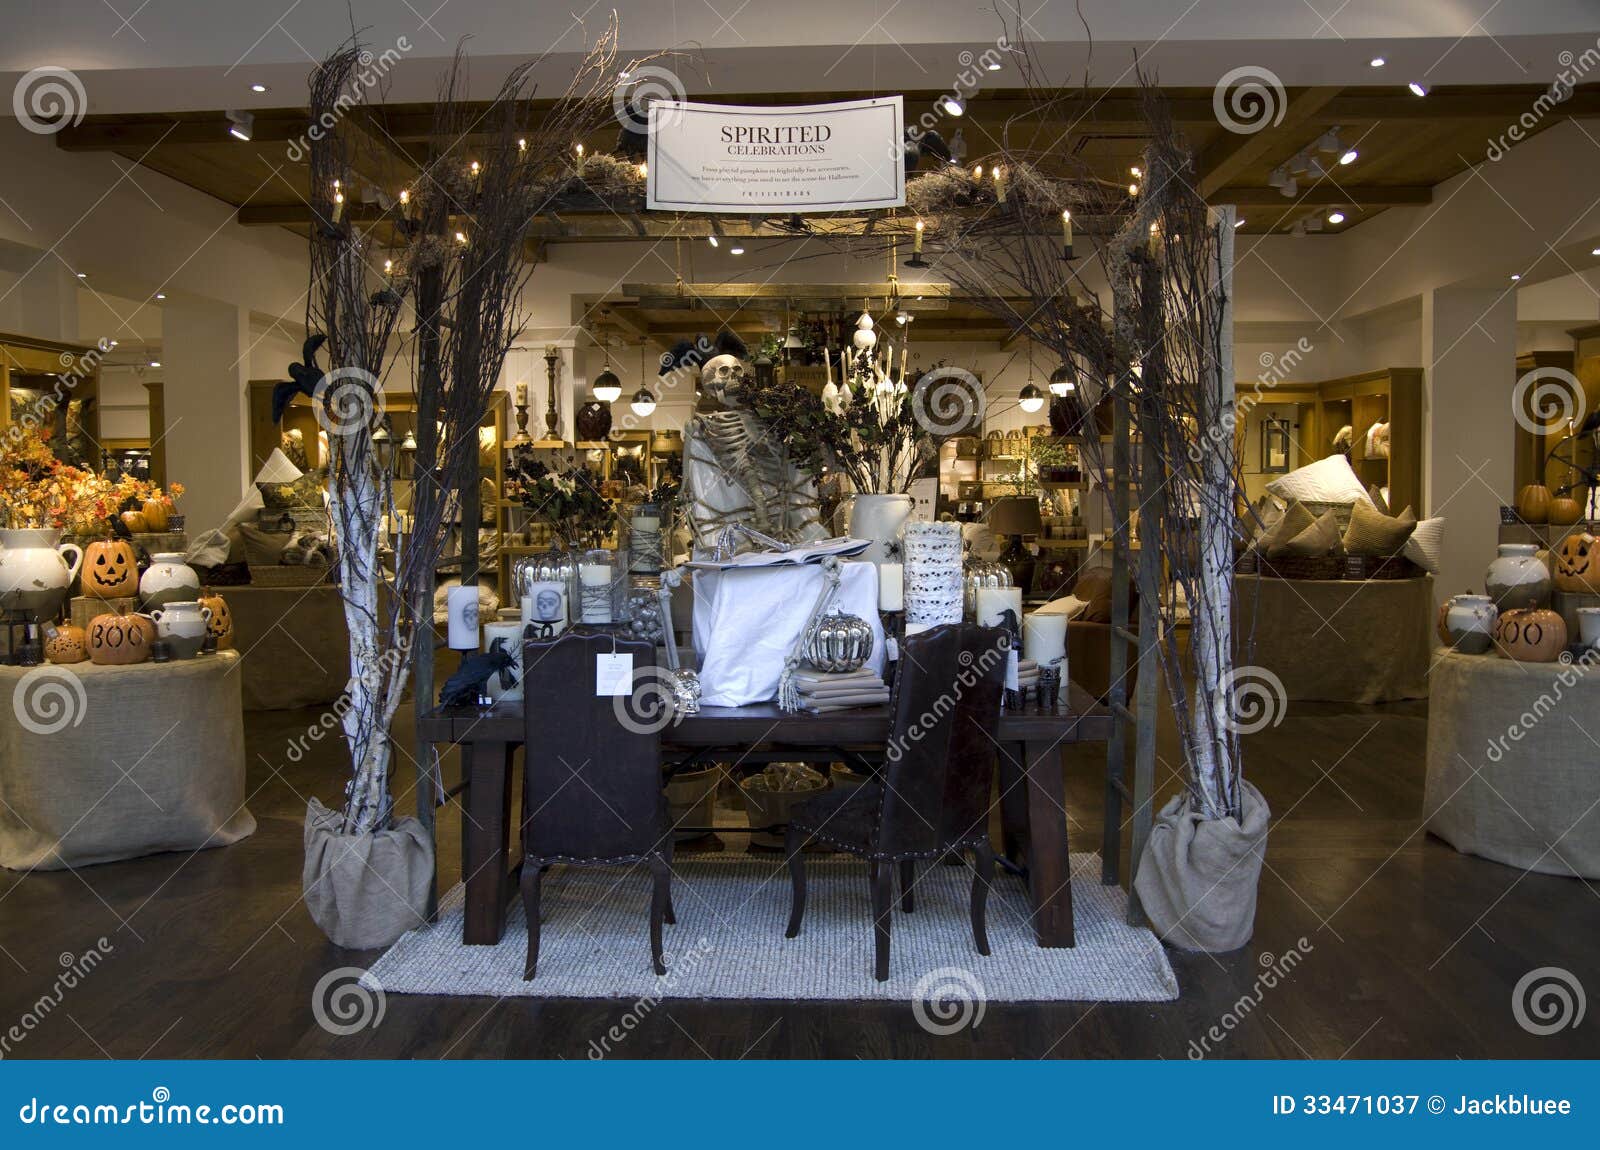 Home Furniture And Decor  Store  Stock Image Image of 